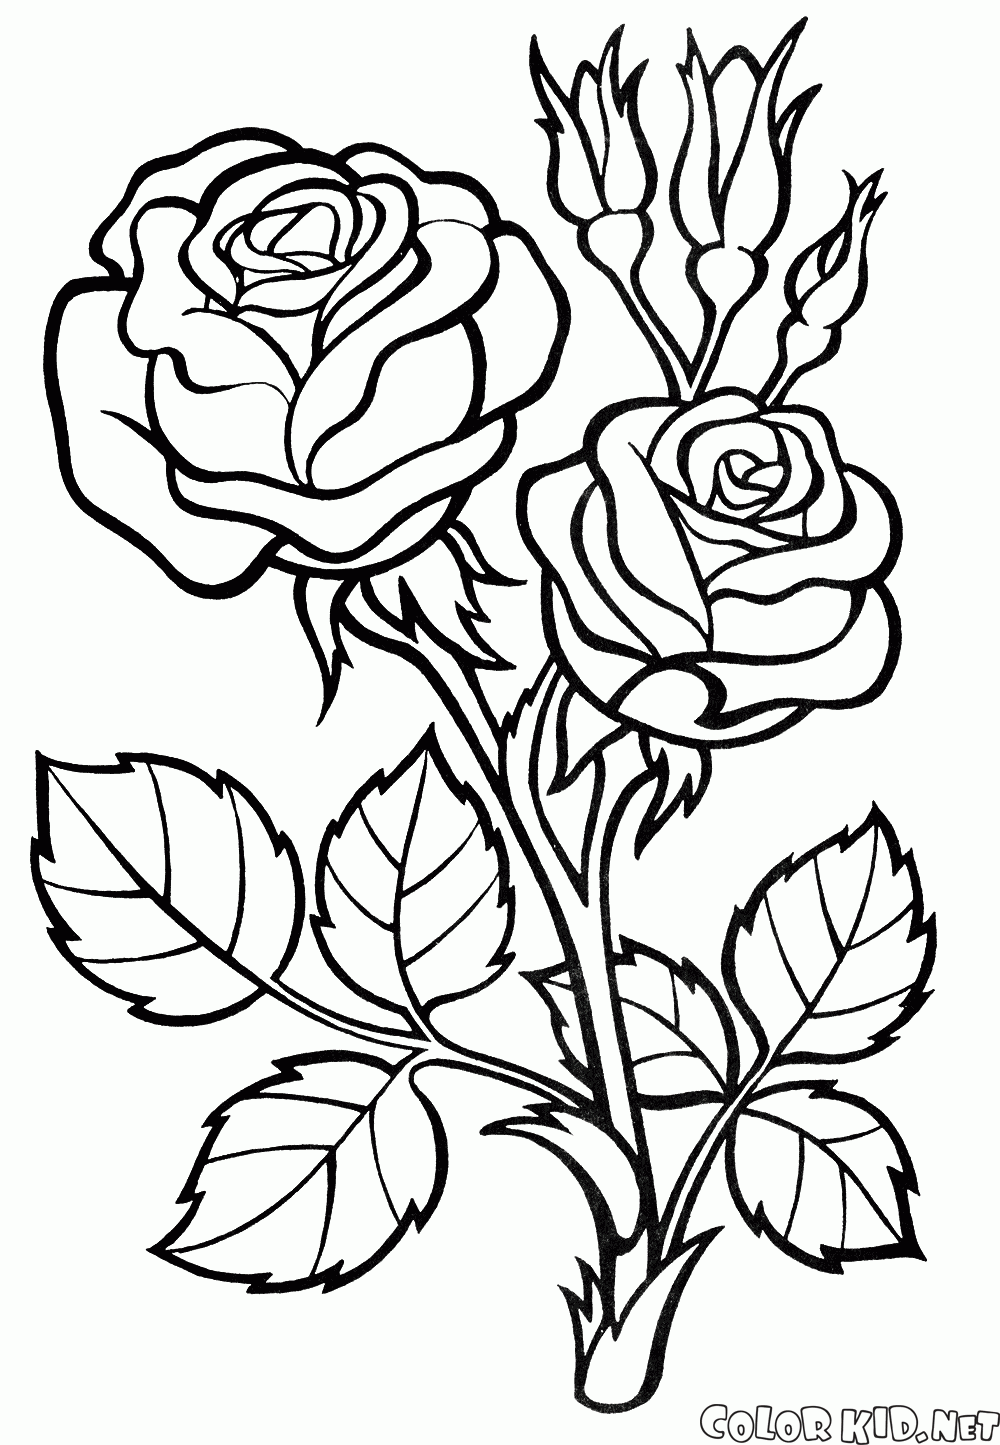 Coloring page Rose